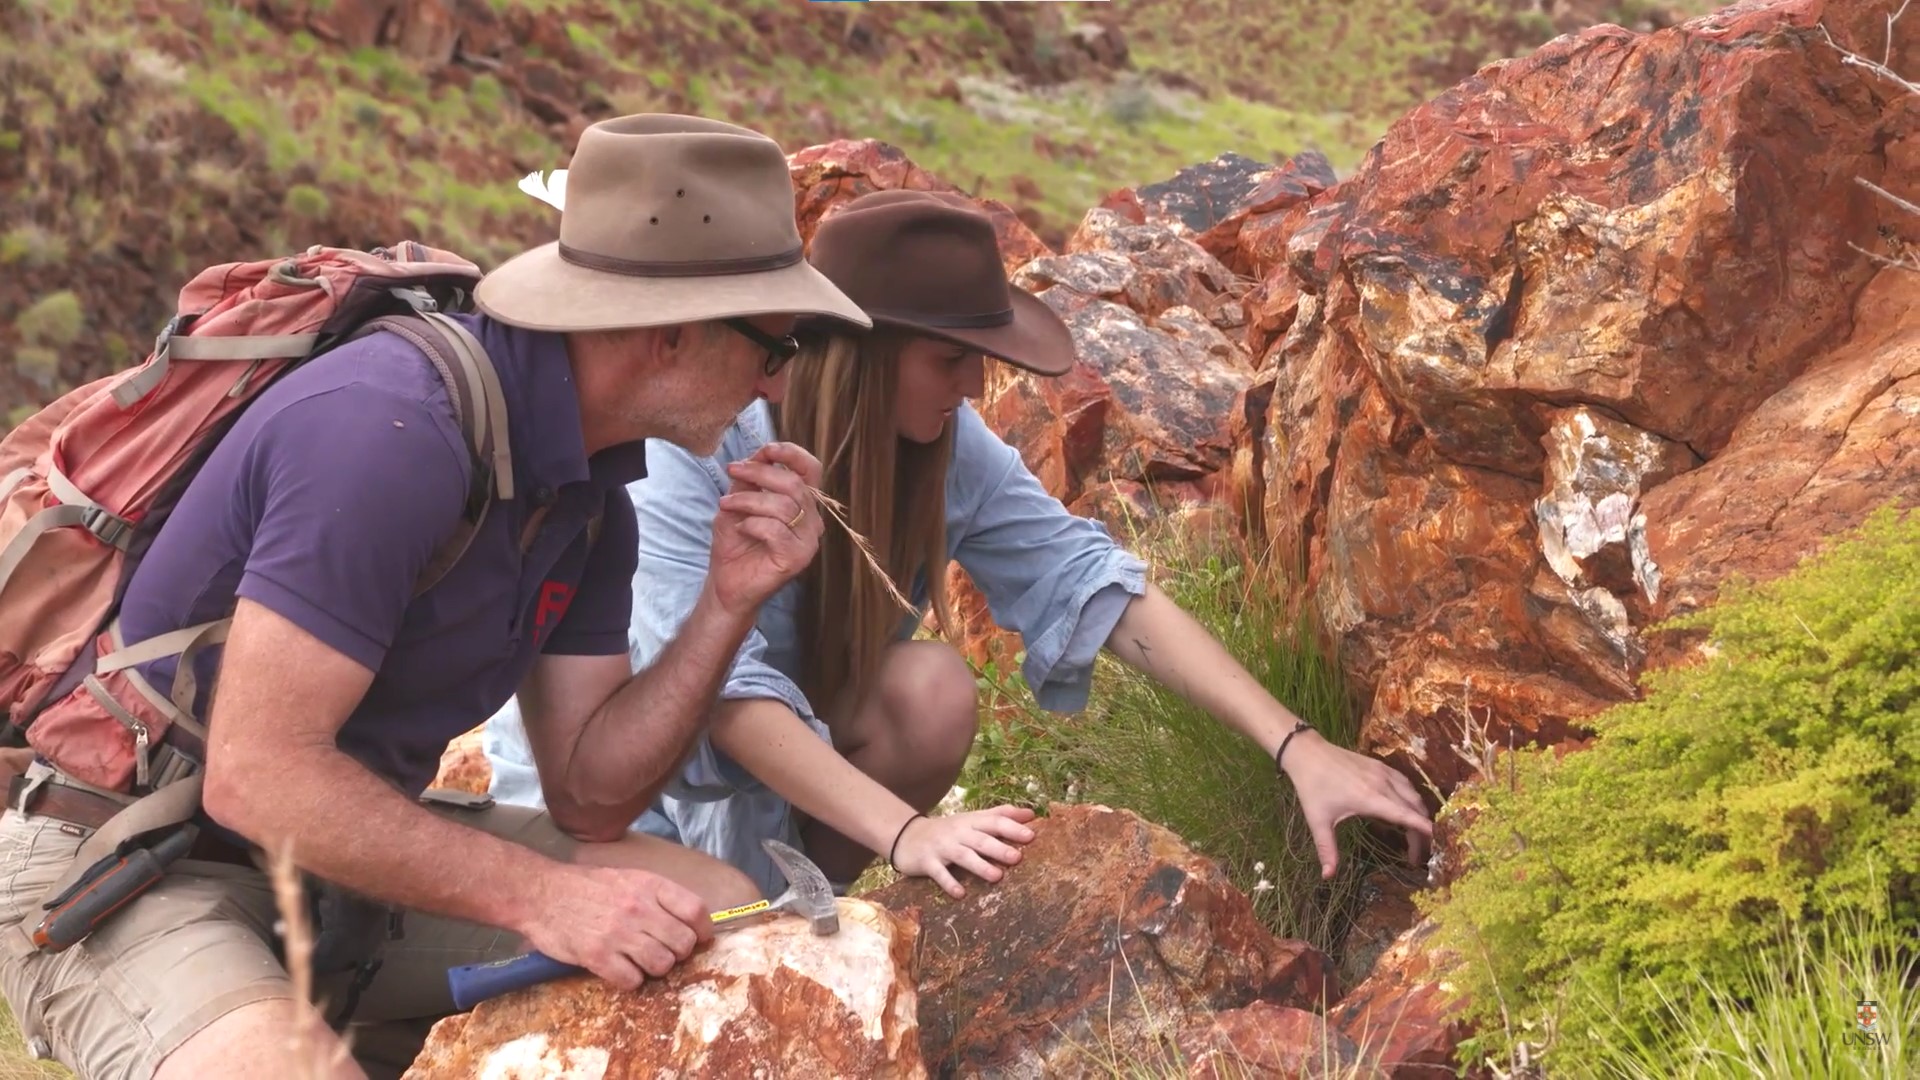 Astrobiologists Martin Van Kranendonk and Tara Djokic examine the fossilized remains of an ancient hot spring in the Pilbara region of Australia. 